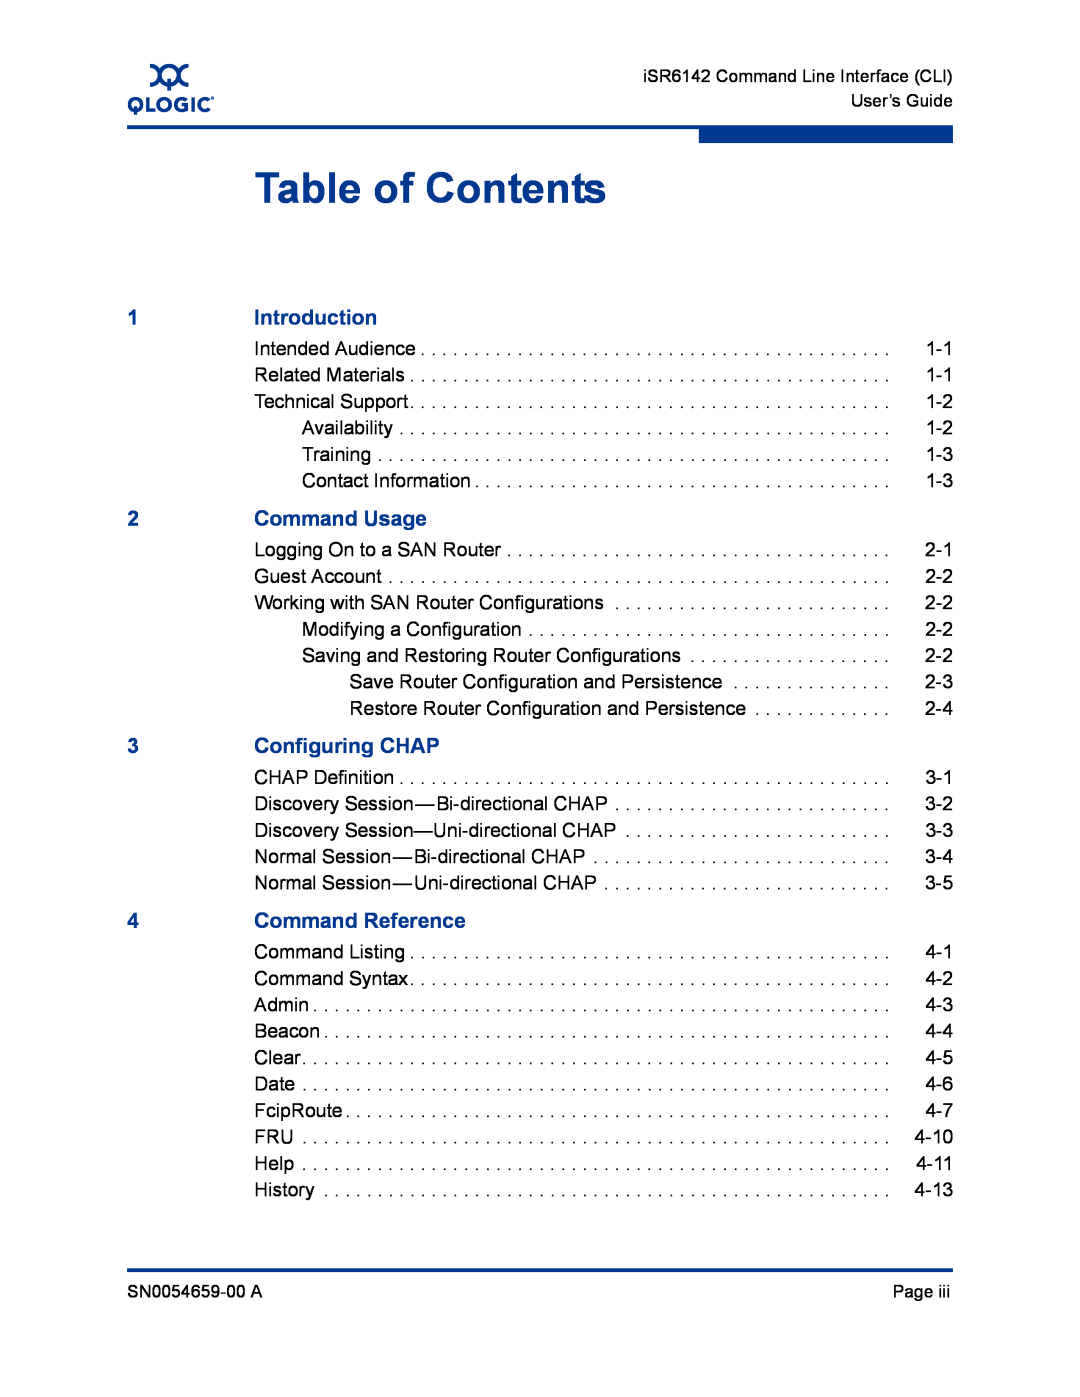 Q-Logic ISR6142 manual Introduction, Command Usage, Configuring CHAP, Command Reference, Table of Contents 